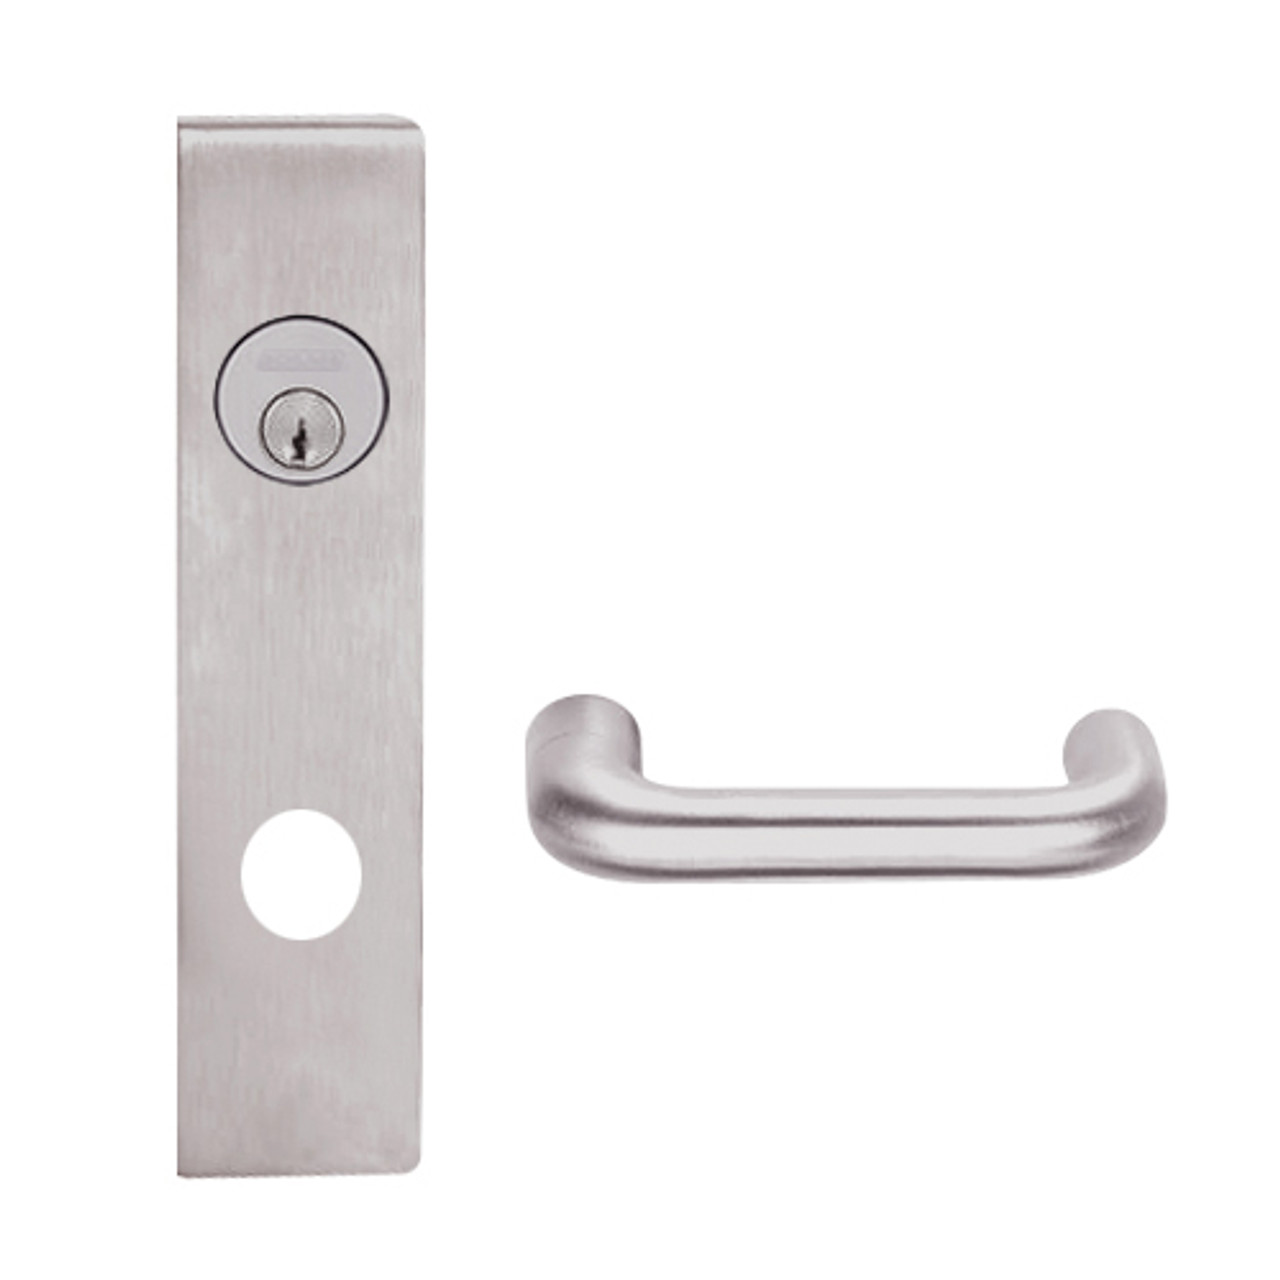 L9453P-03L-630 Schlage L Series Entrance with Deadbolt Commercial Mortise Lock with 03 Cast Lever Design in Satin Stainless Steel